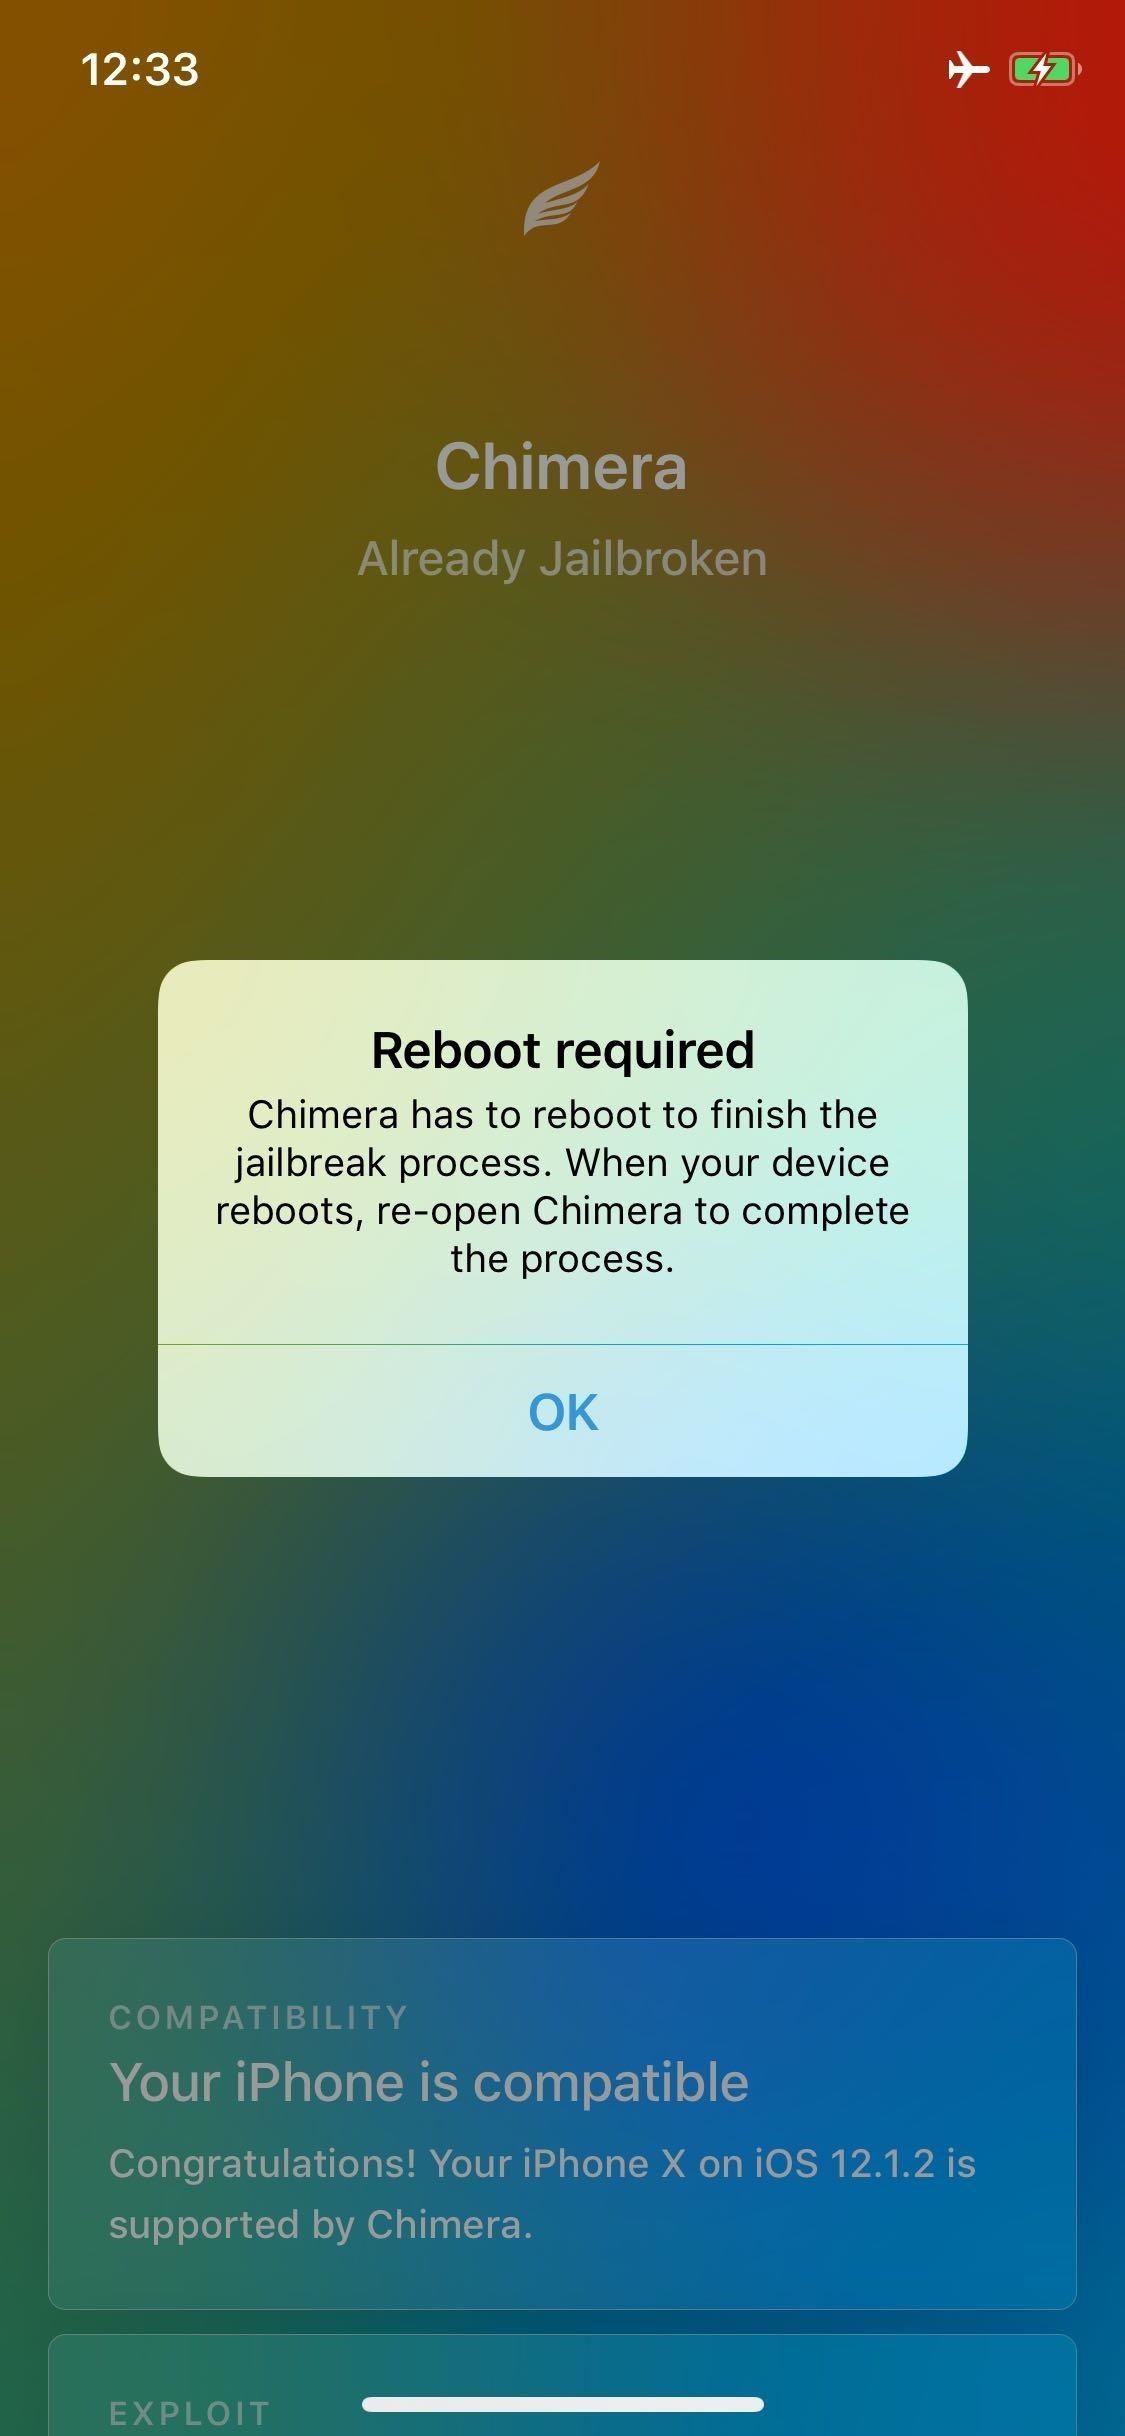 How to Jailbreak iOS 12 to iOS 13.5 on Your iPhone Using Unc0ver or Chimera